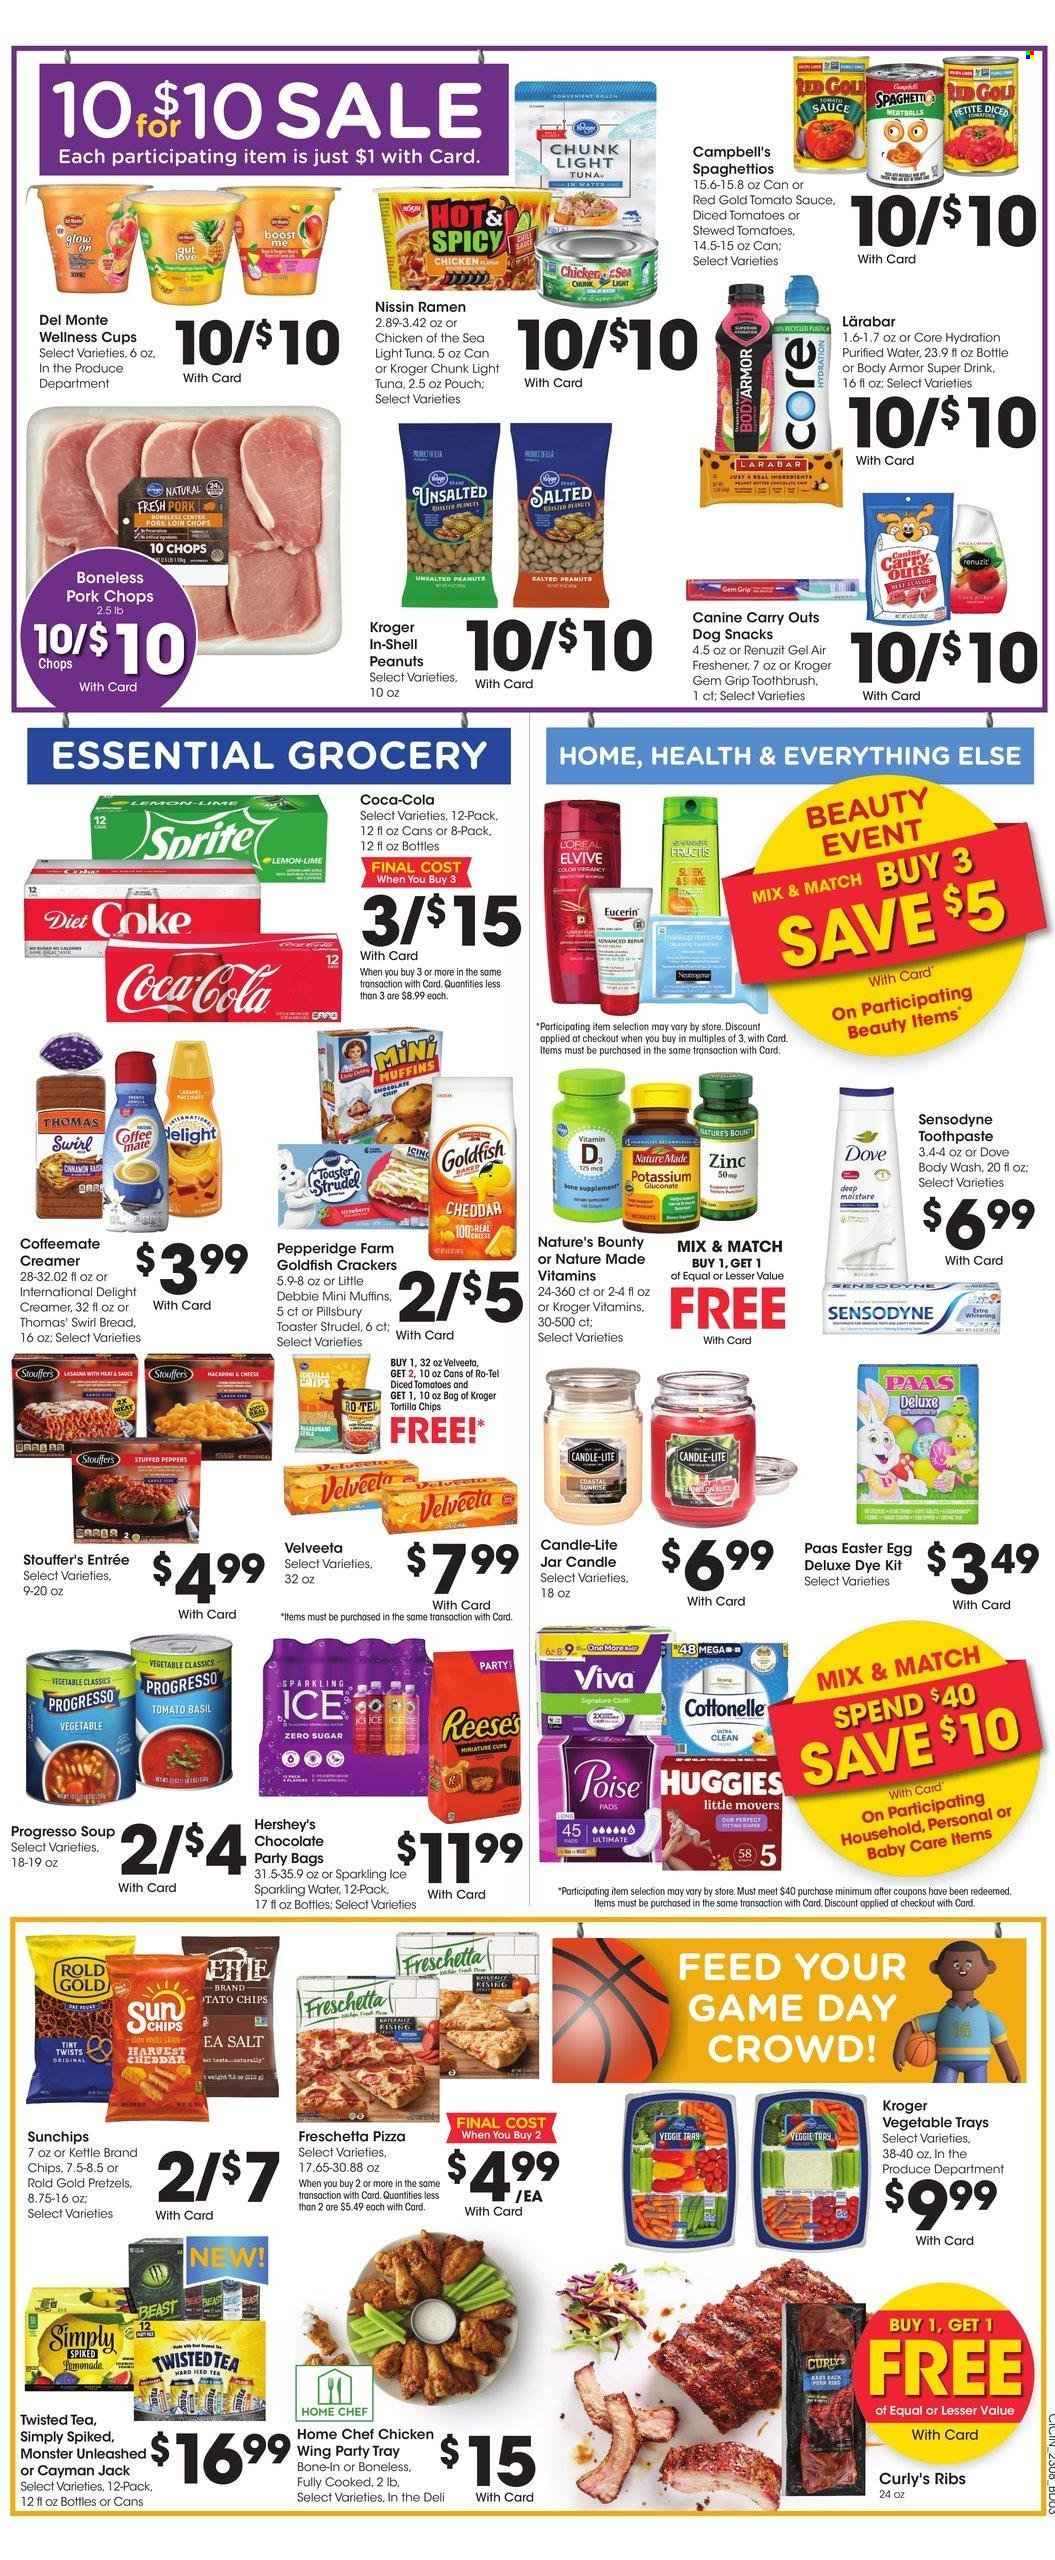 thumbnail - Kroger Flyer - 03/22/2023 - 03/28/2023 - Sales products - easter egg, pretzels, strudel, muffin, peppers, Campbell's, ramen, spaghetti, pizza, Pillsbury, Progresso, Nissin, cheese, Coffee-Mate, creamer, Reese's, Hershey's, Stouffer's, Dove, chocolate, snack, crackers, tortilla chips, chips, Goldfish, tomato sauce, light tuna, Chicken of the Sea, diced tomatoes, Del Monte, peanuts, Coca-Cola, Sprite, Body Armor, Monster, Diet Coke, Coke, sparkling water, purified water, water, Boost, tea, beer, ribs, pork chops, pork meat, Huggies, pants, Cottonelle, body wash, toothbrush, toothpaste, Sensodyne, Fructis, Eucerin, cup, candle, Renuzit, air freshener, kettle, Shell, Nature Made, Nature's Bounty, zinc, Twisted Tea. Page 4.